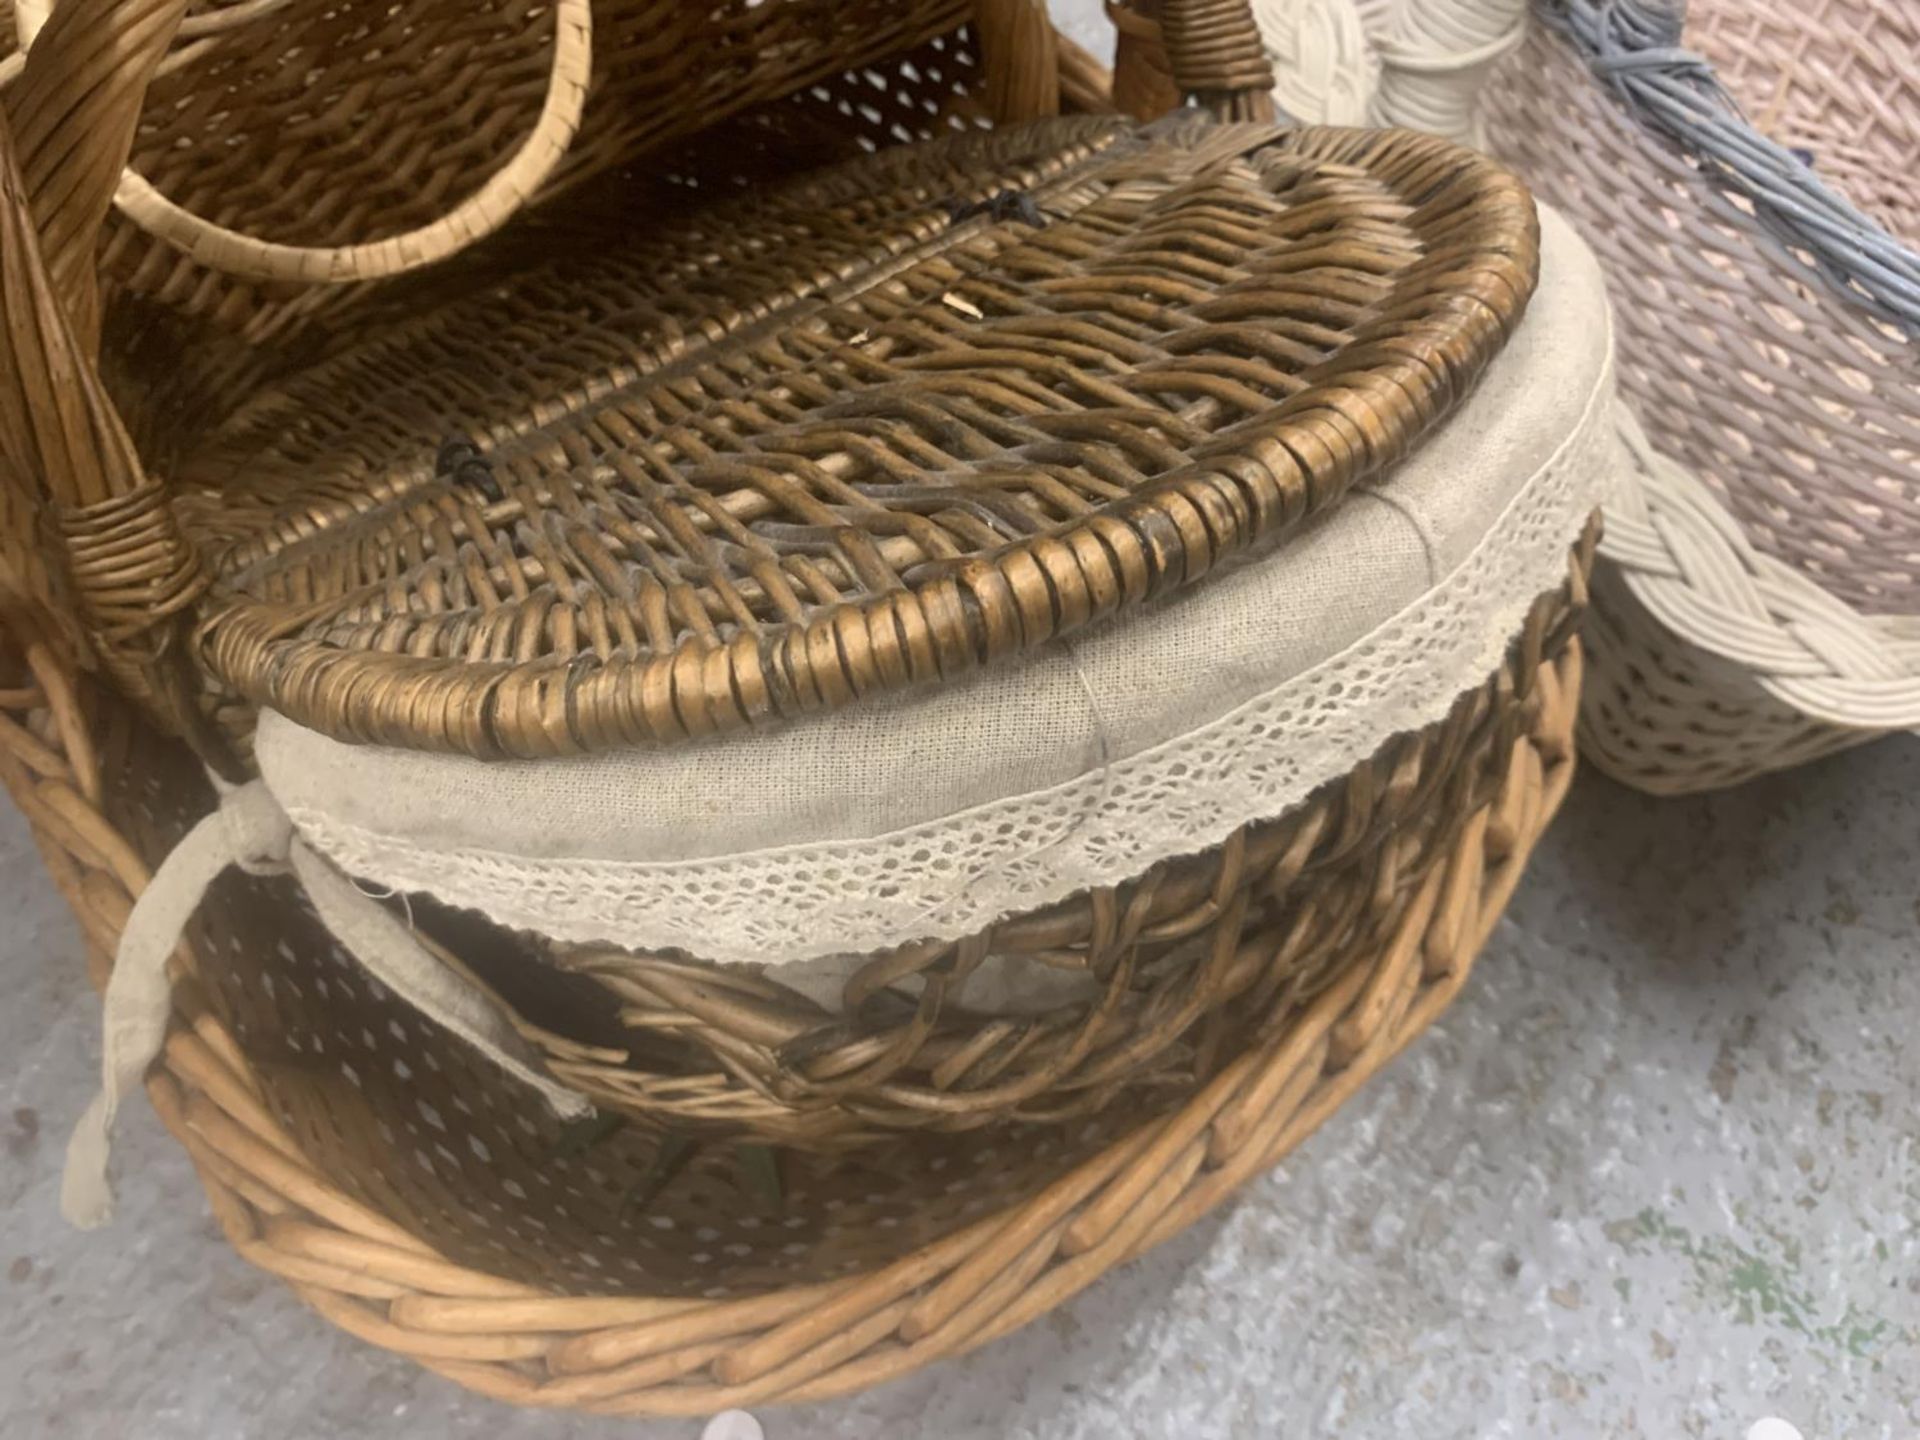 A QUANTITY OF WICKER BASKETS TO INCLUDE SHOPPING BASKETS - 7 IN TOTAL - Image 2 of 3